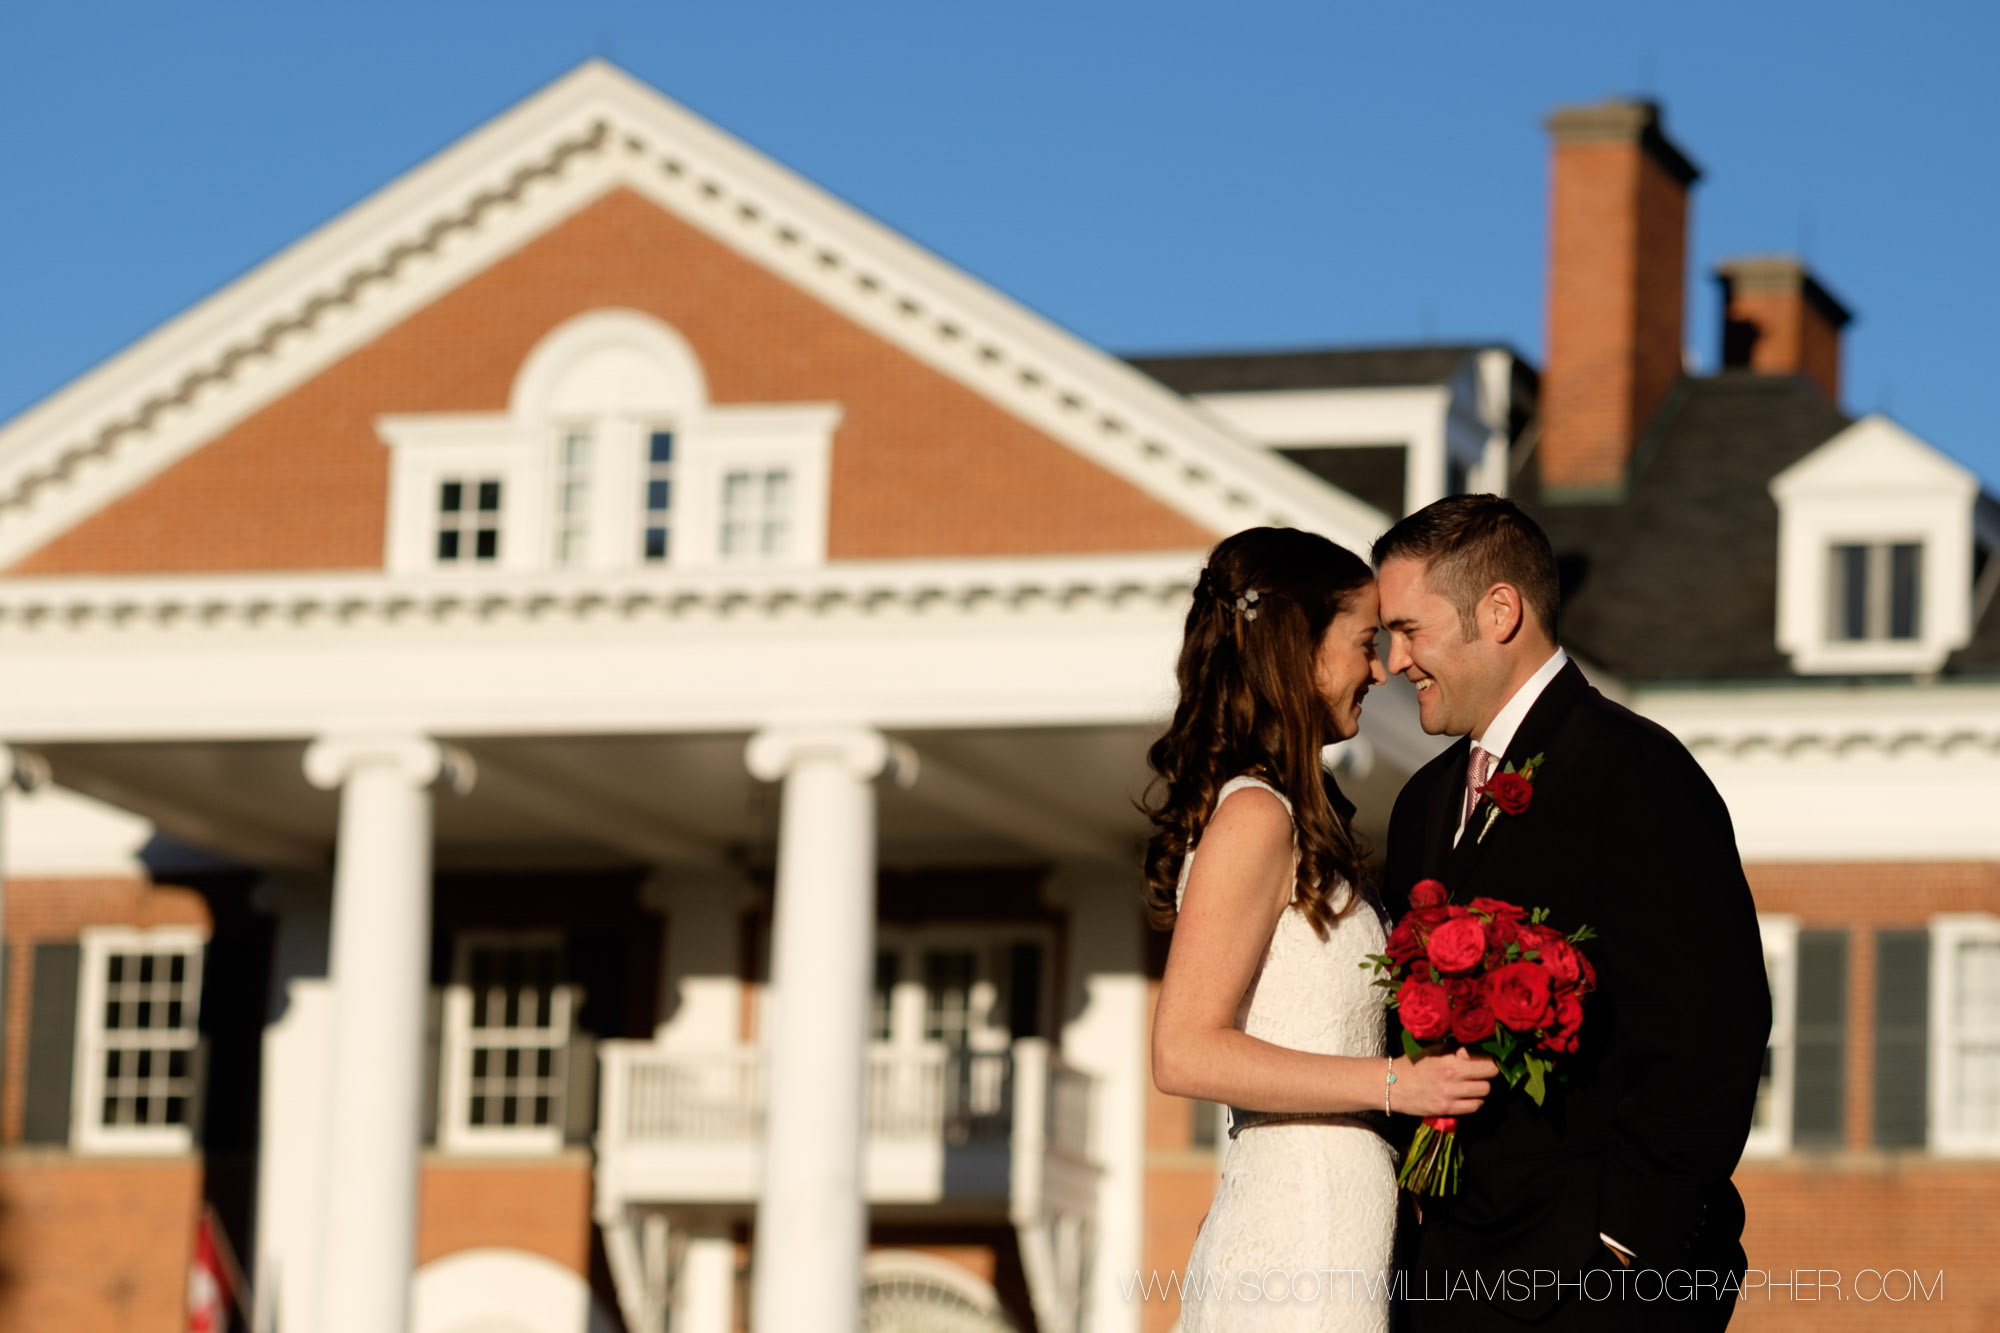  A wedding portrait taken at sunset in front of Langdon Hall in Cambridge, Ontario.&nbsp; 